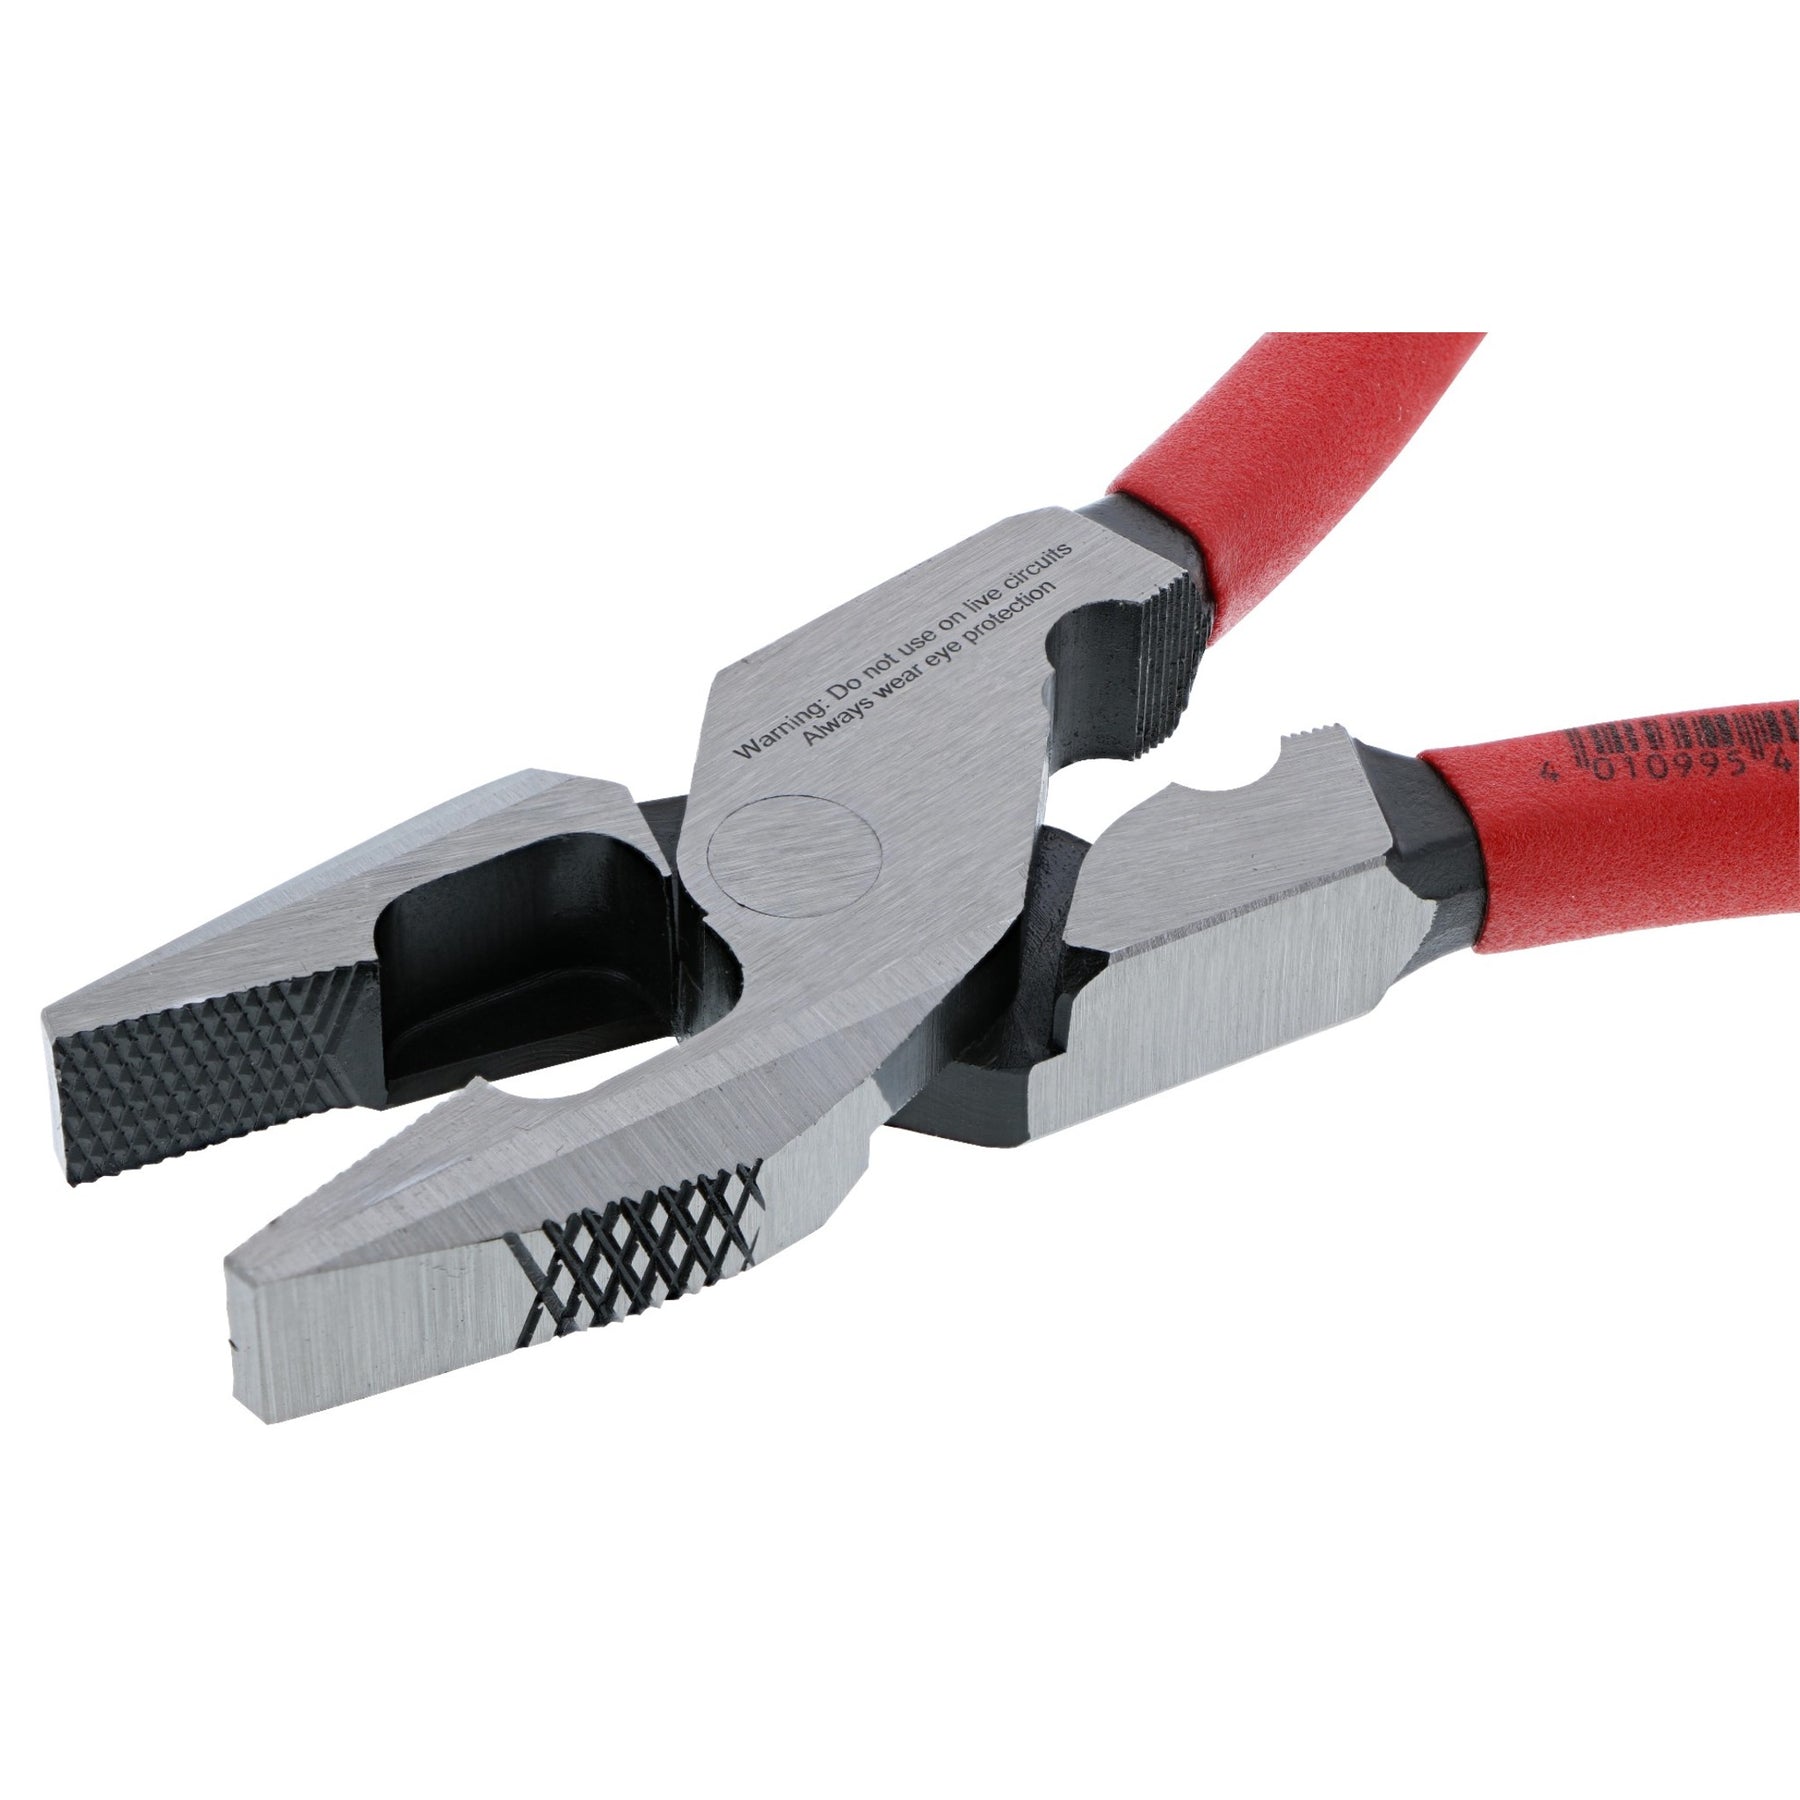 Classic Grip NE Style Lineman’s Pliers with Crimpers 9.5"